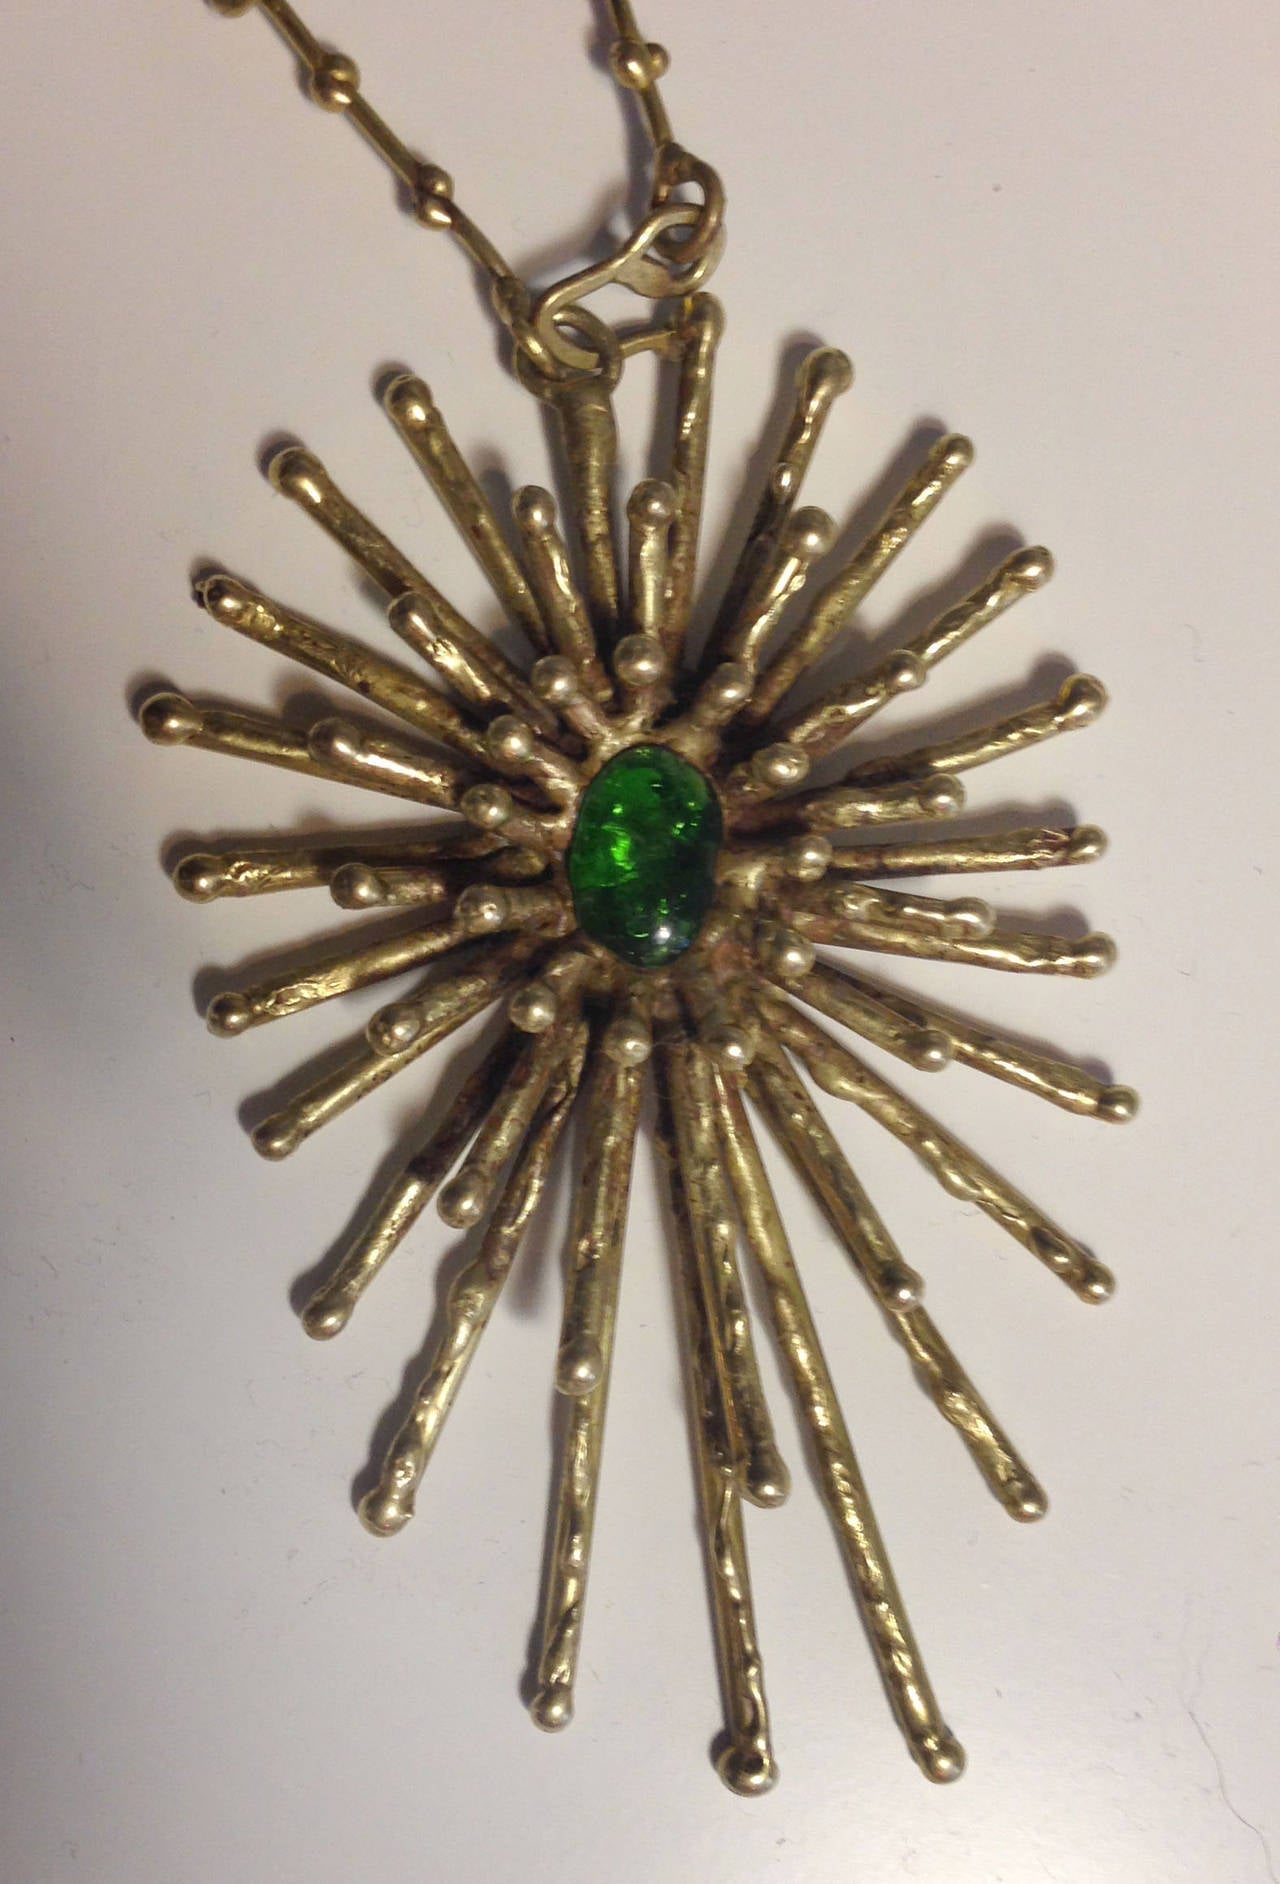 Beautiful Pal Kepenyes sunburst brass necklace with green blown glass.
Pal Kepenyes is a Hungarian sculptor, he is now living in Mexico since the 1990s, he is well-known for working with materials like brass, bronze, copper, silver and gold.